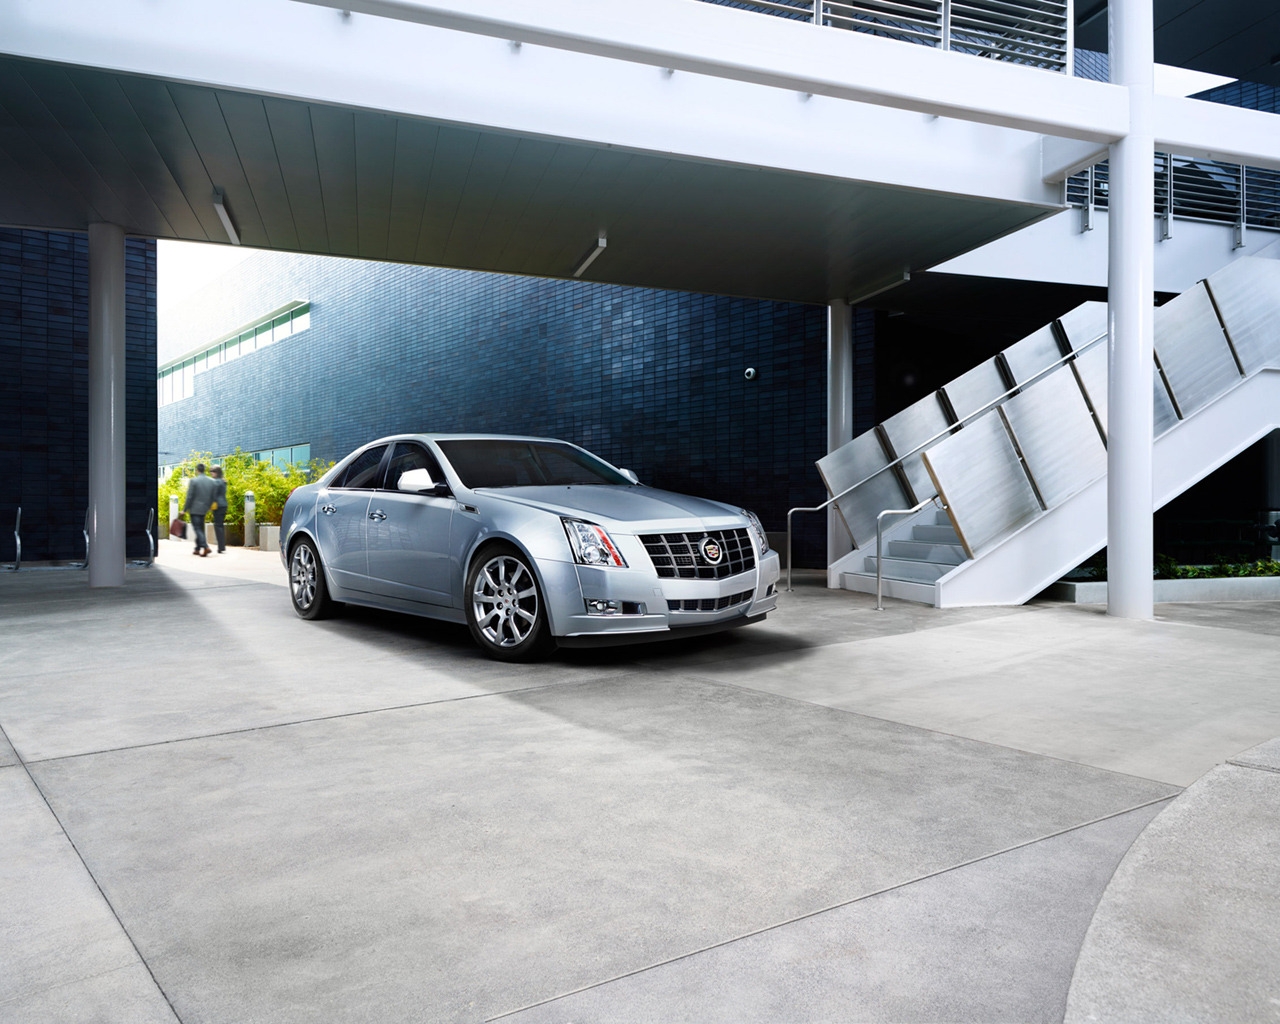 2012 Cadillac CTS Touring Edition for 1280 x 1024 resolution